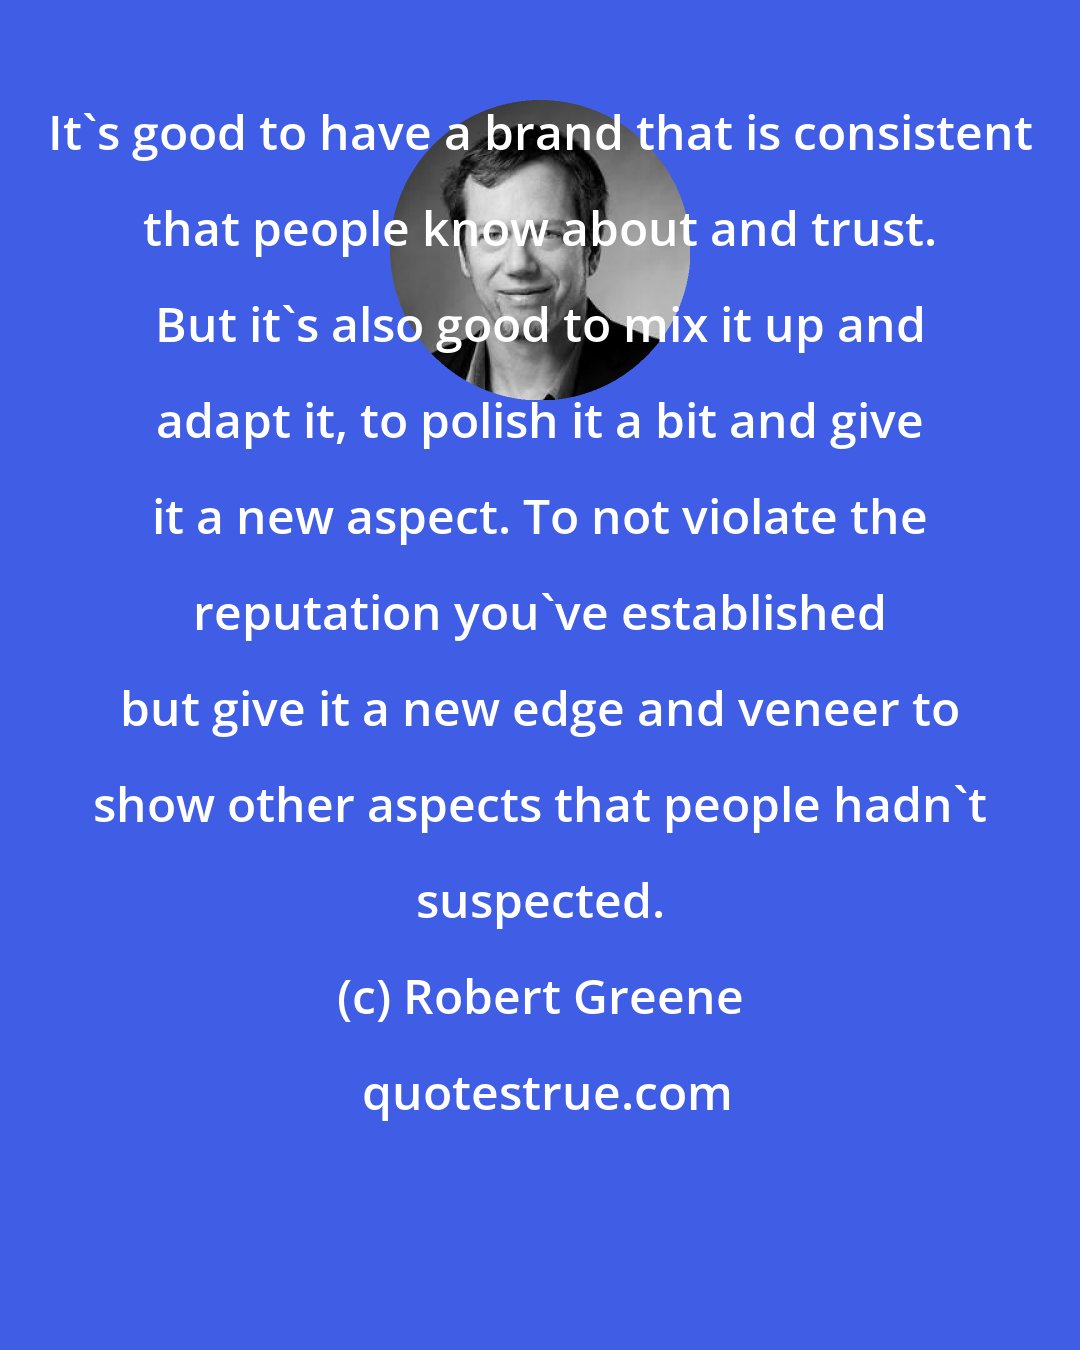 Robert Greene: It's good to have a brand that is consistent that people know about and trust. But it's also good to mix it up and adapt it, to polish it a bit and give it a new aspect. To not violate the reputation you've established but give it a new edge and veneer to show other aspects that people hadn't suspected.